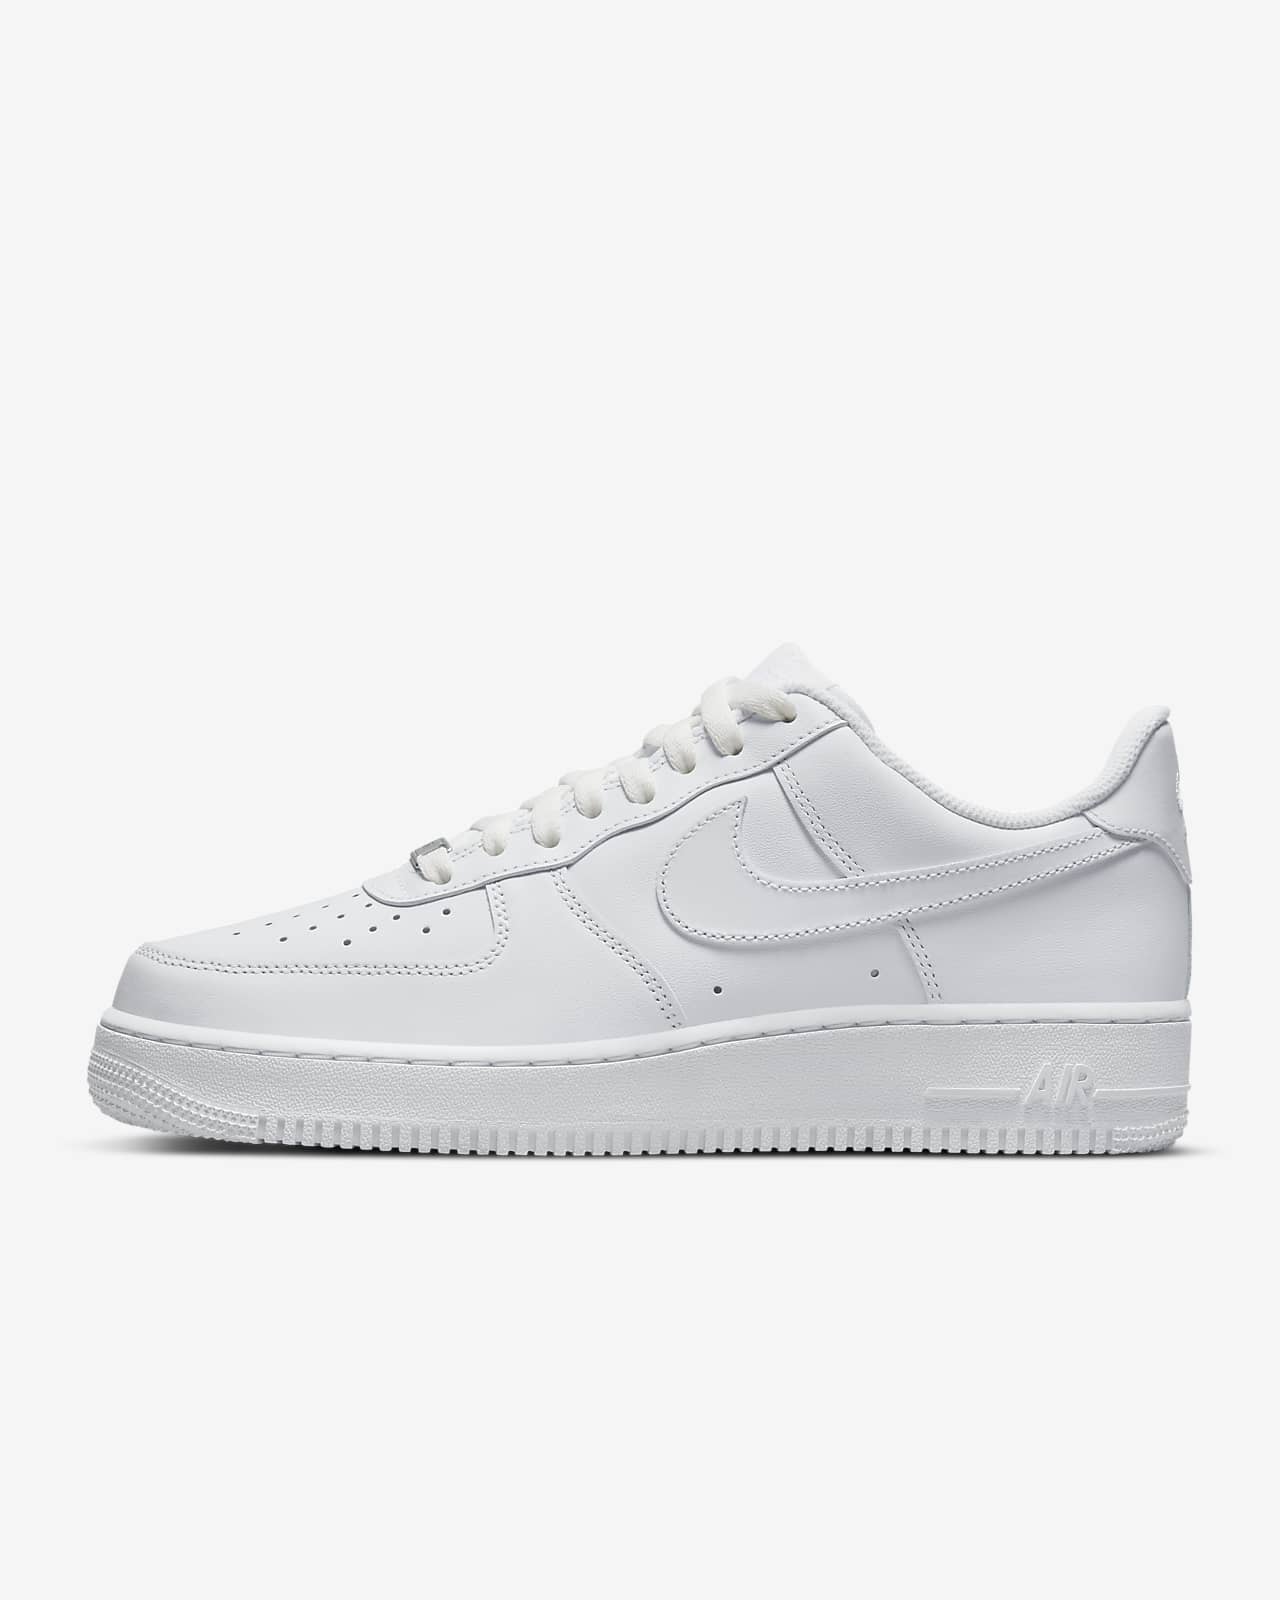 Previs site relax To deal with Nike Air Force 1 '07 Men's Shoes. Nike.com